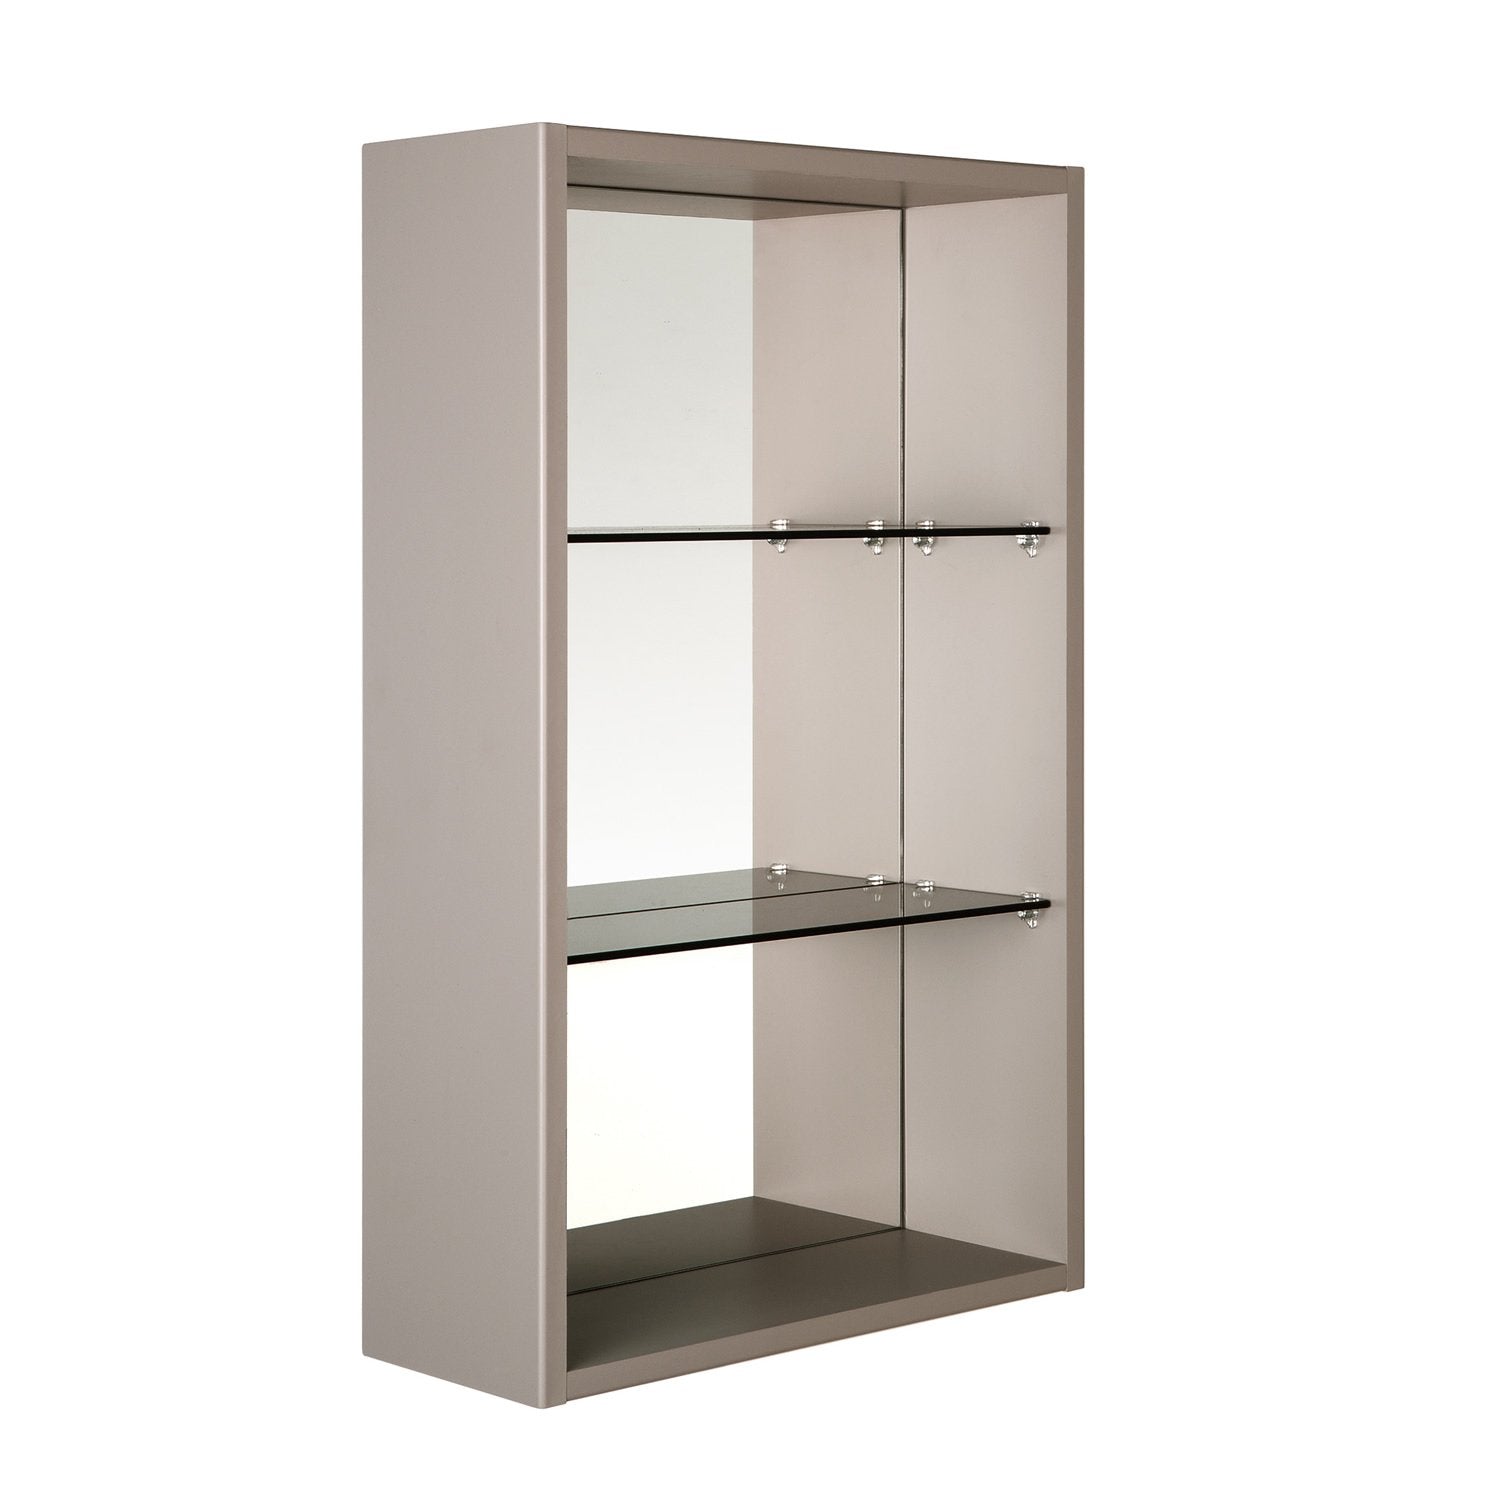 16" Open Side Cabinet with Shelves and Mirror, Wall Mount, Mink, Serie Class by VALENZUELA